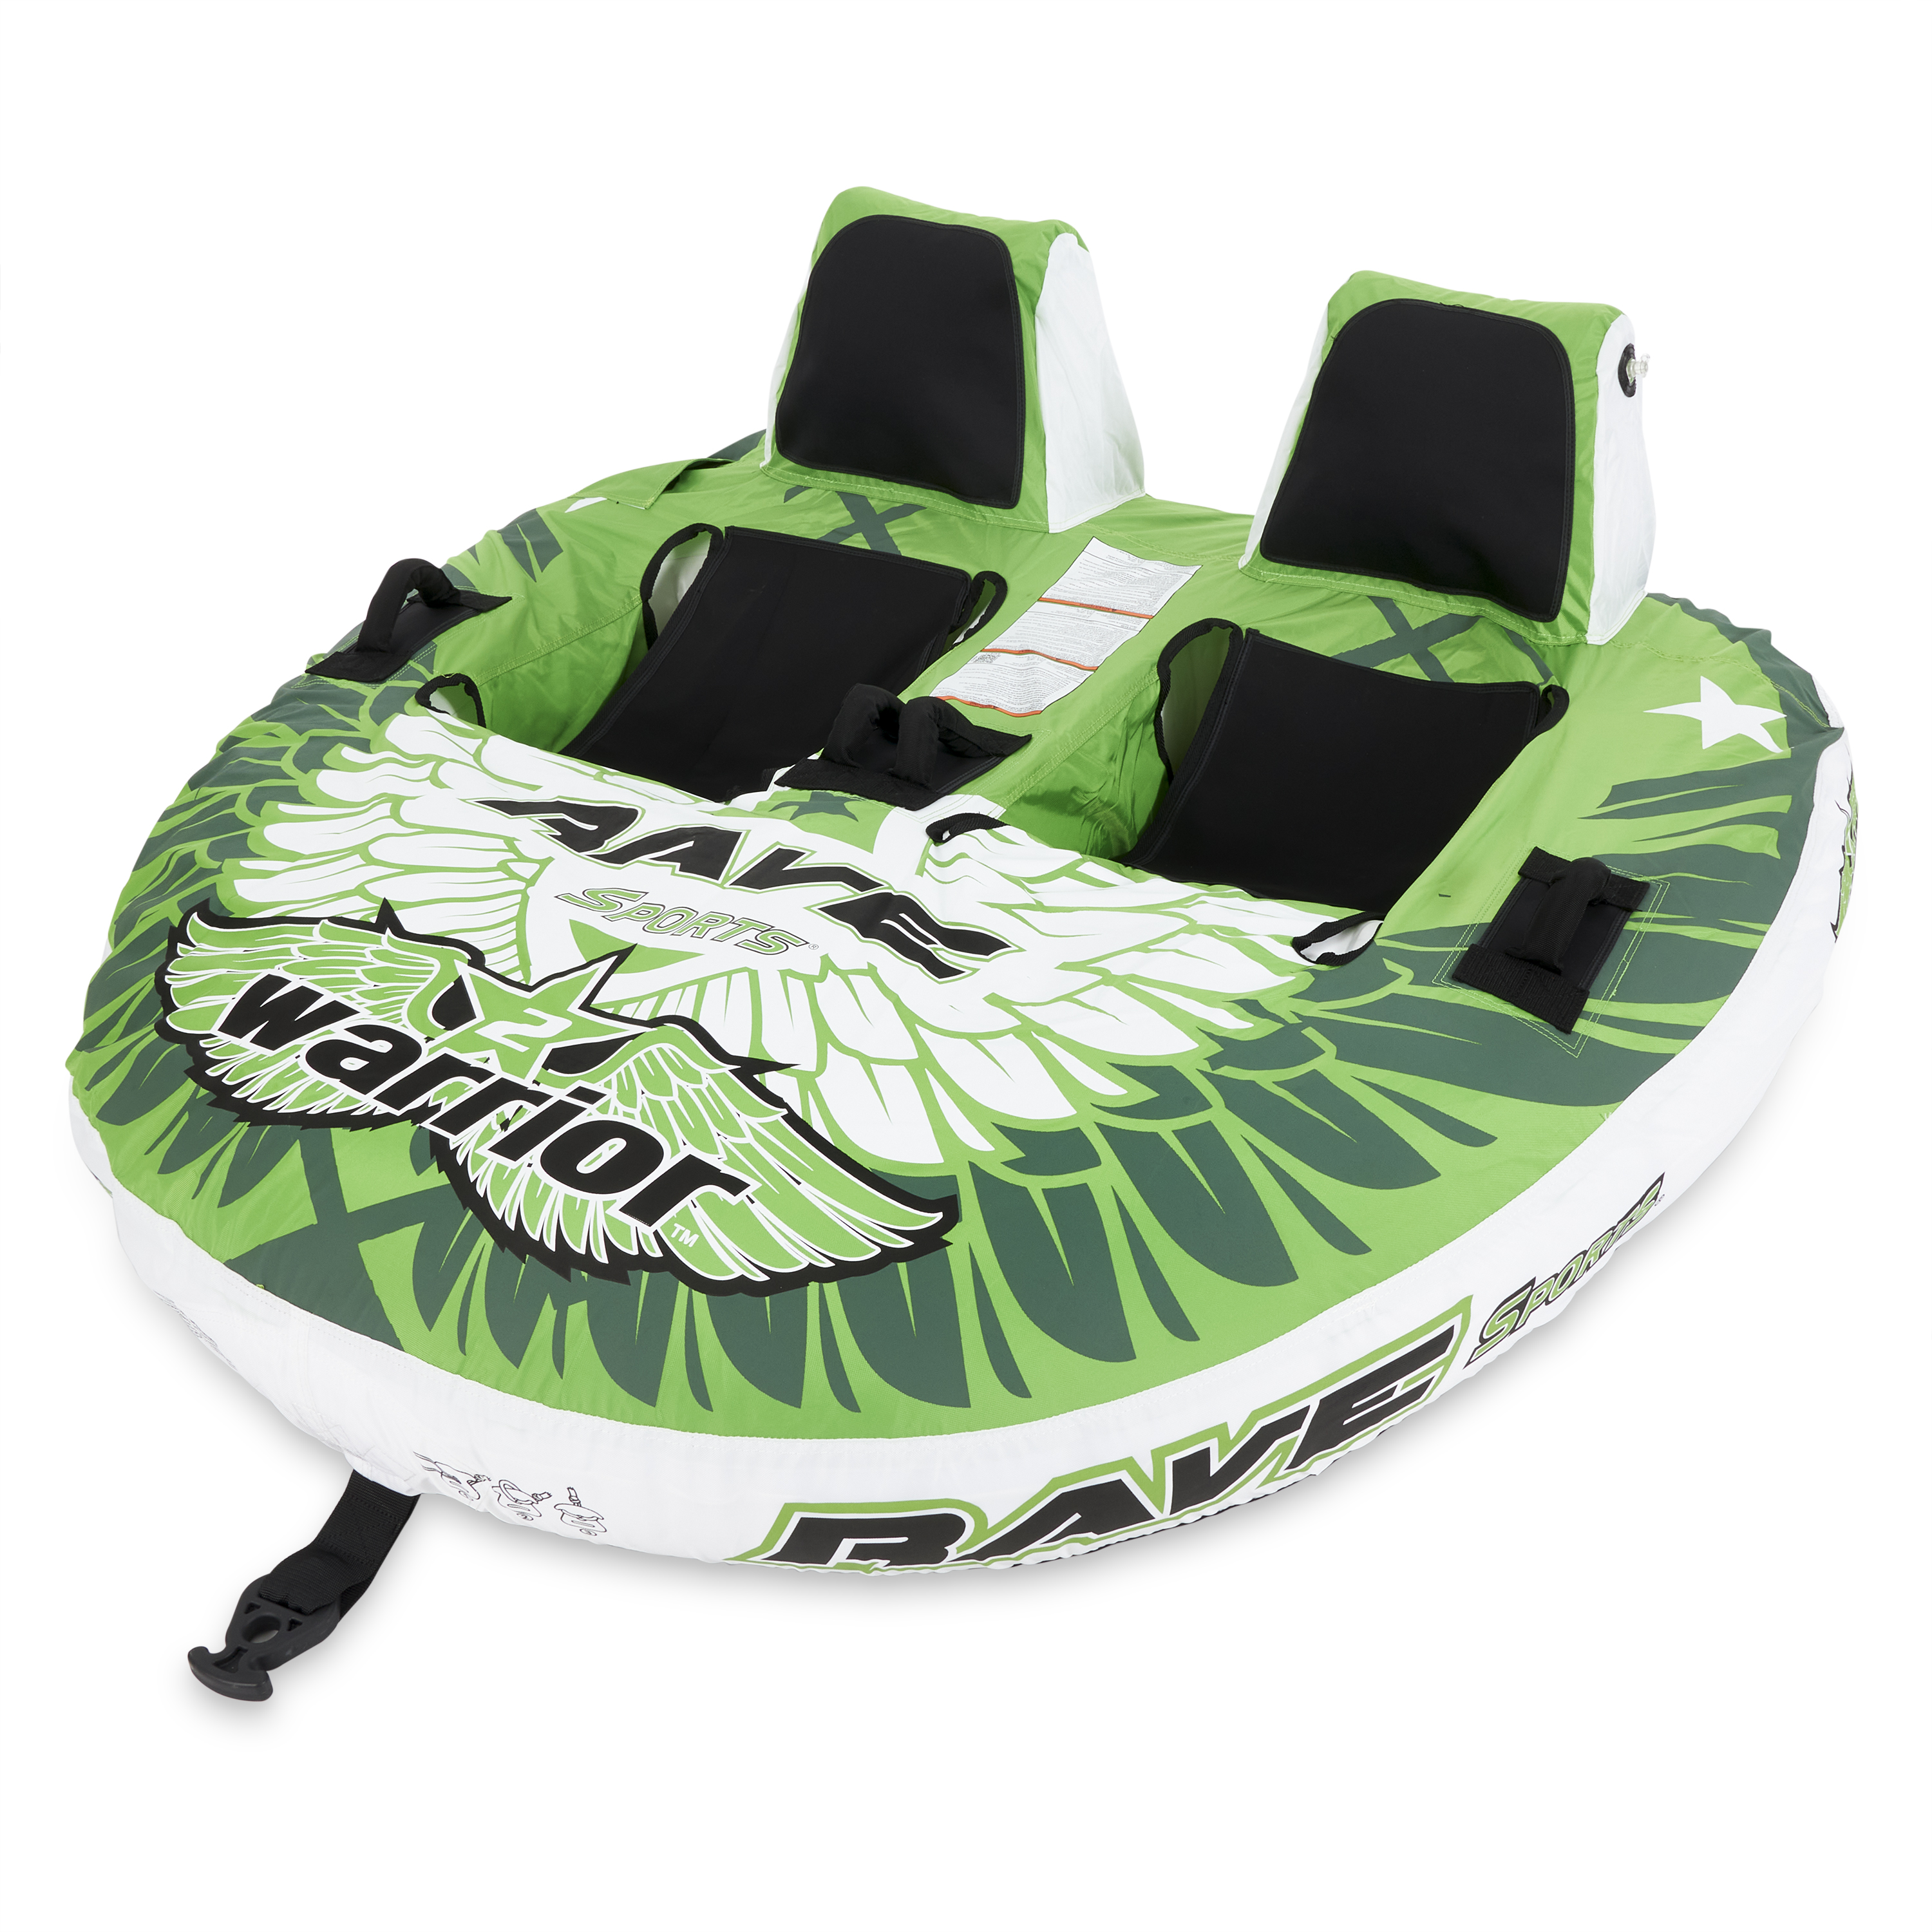 RAVE Sports Warrior II Double Seat Inflatable Towable Tube, Green - image 1 of 3